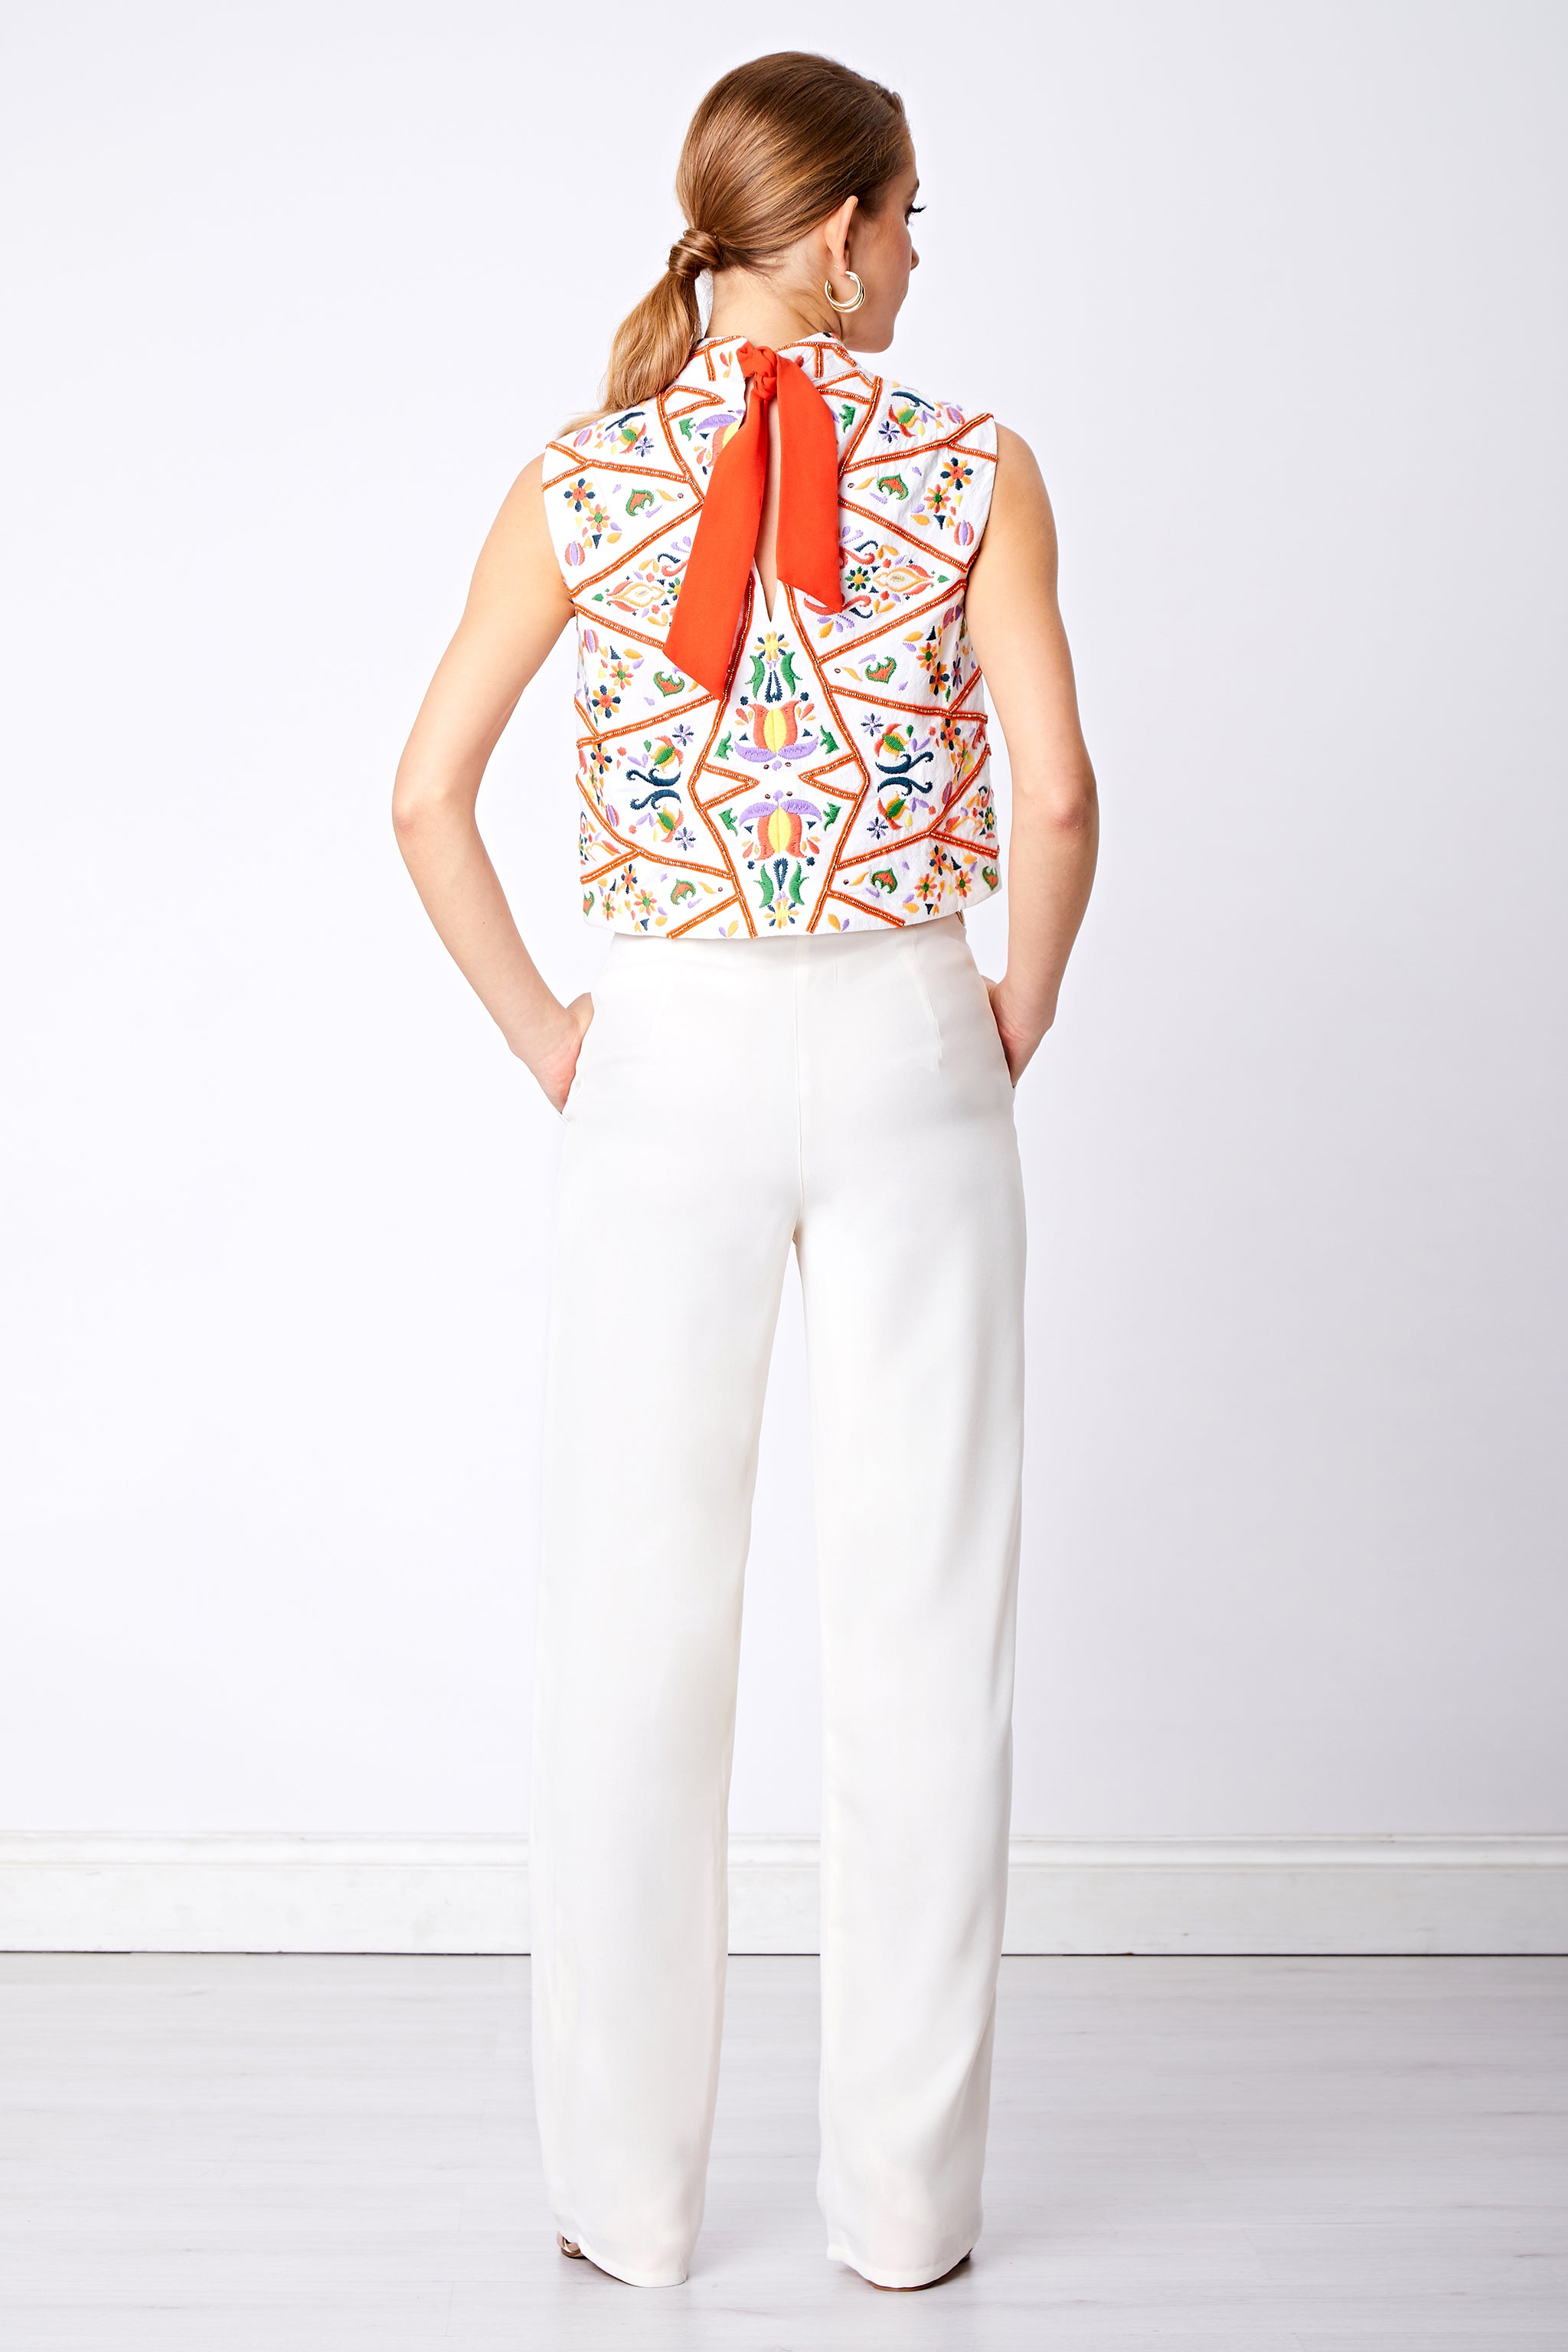 Back view of wide leg white trouser and colourful sleeveless top with orange bow detail